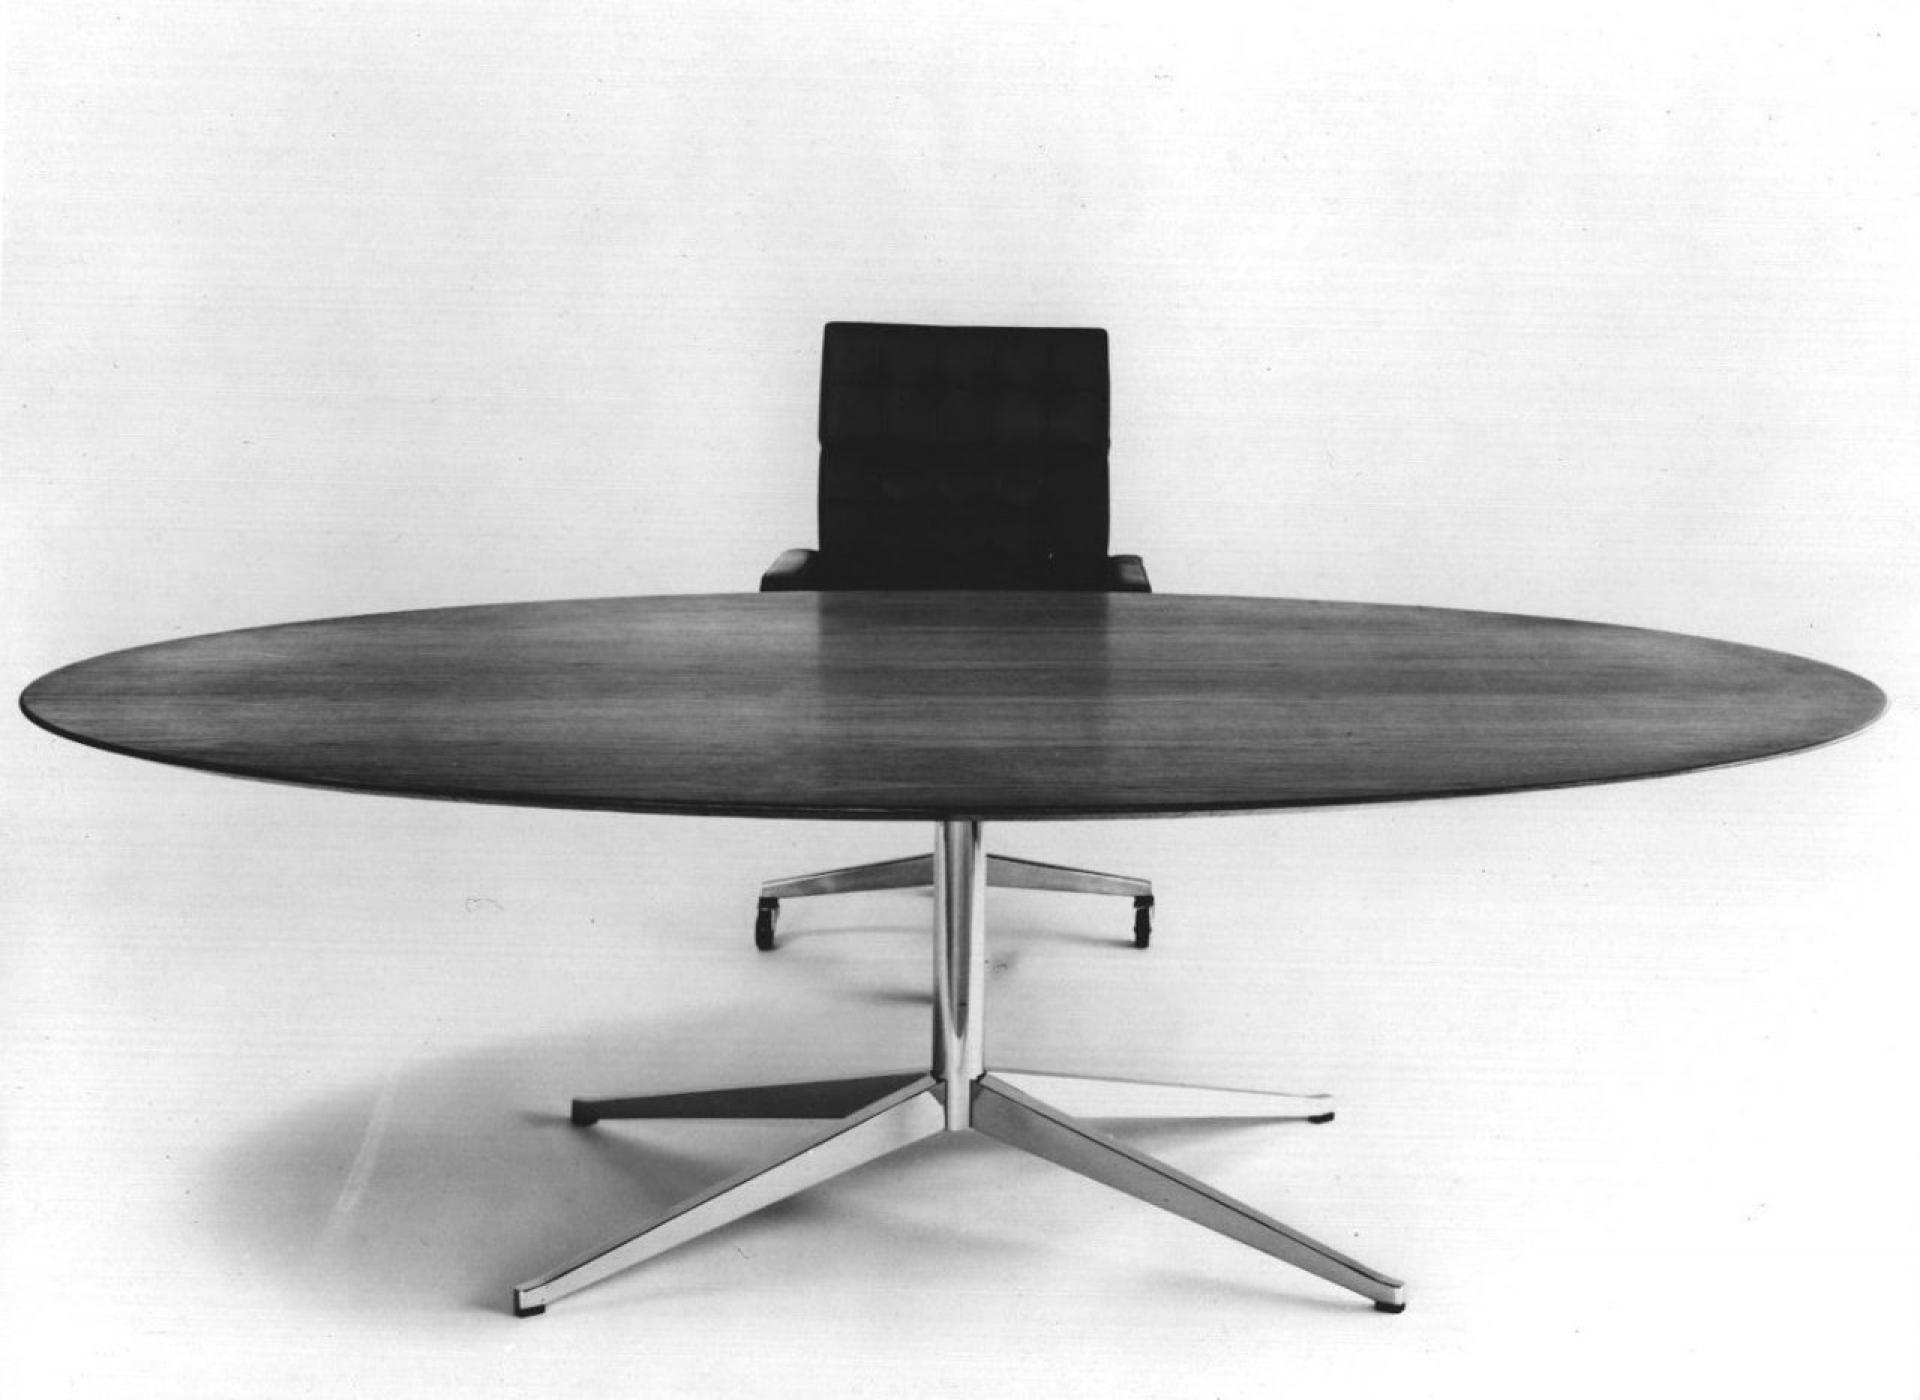 The table desk was designed in 1961, when she as a first woman received the Gold Medal for Industrial Design from the American Institute of Architects.